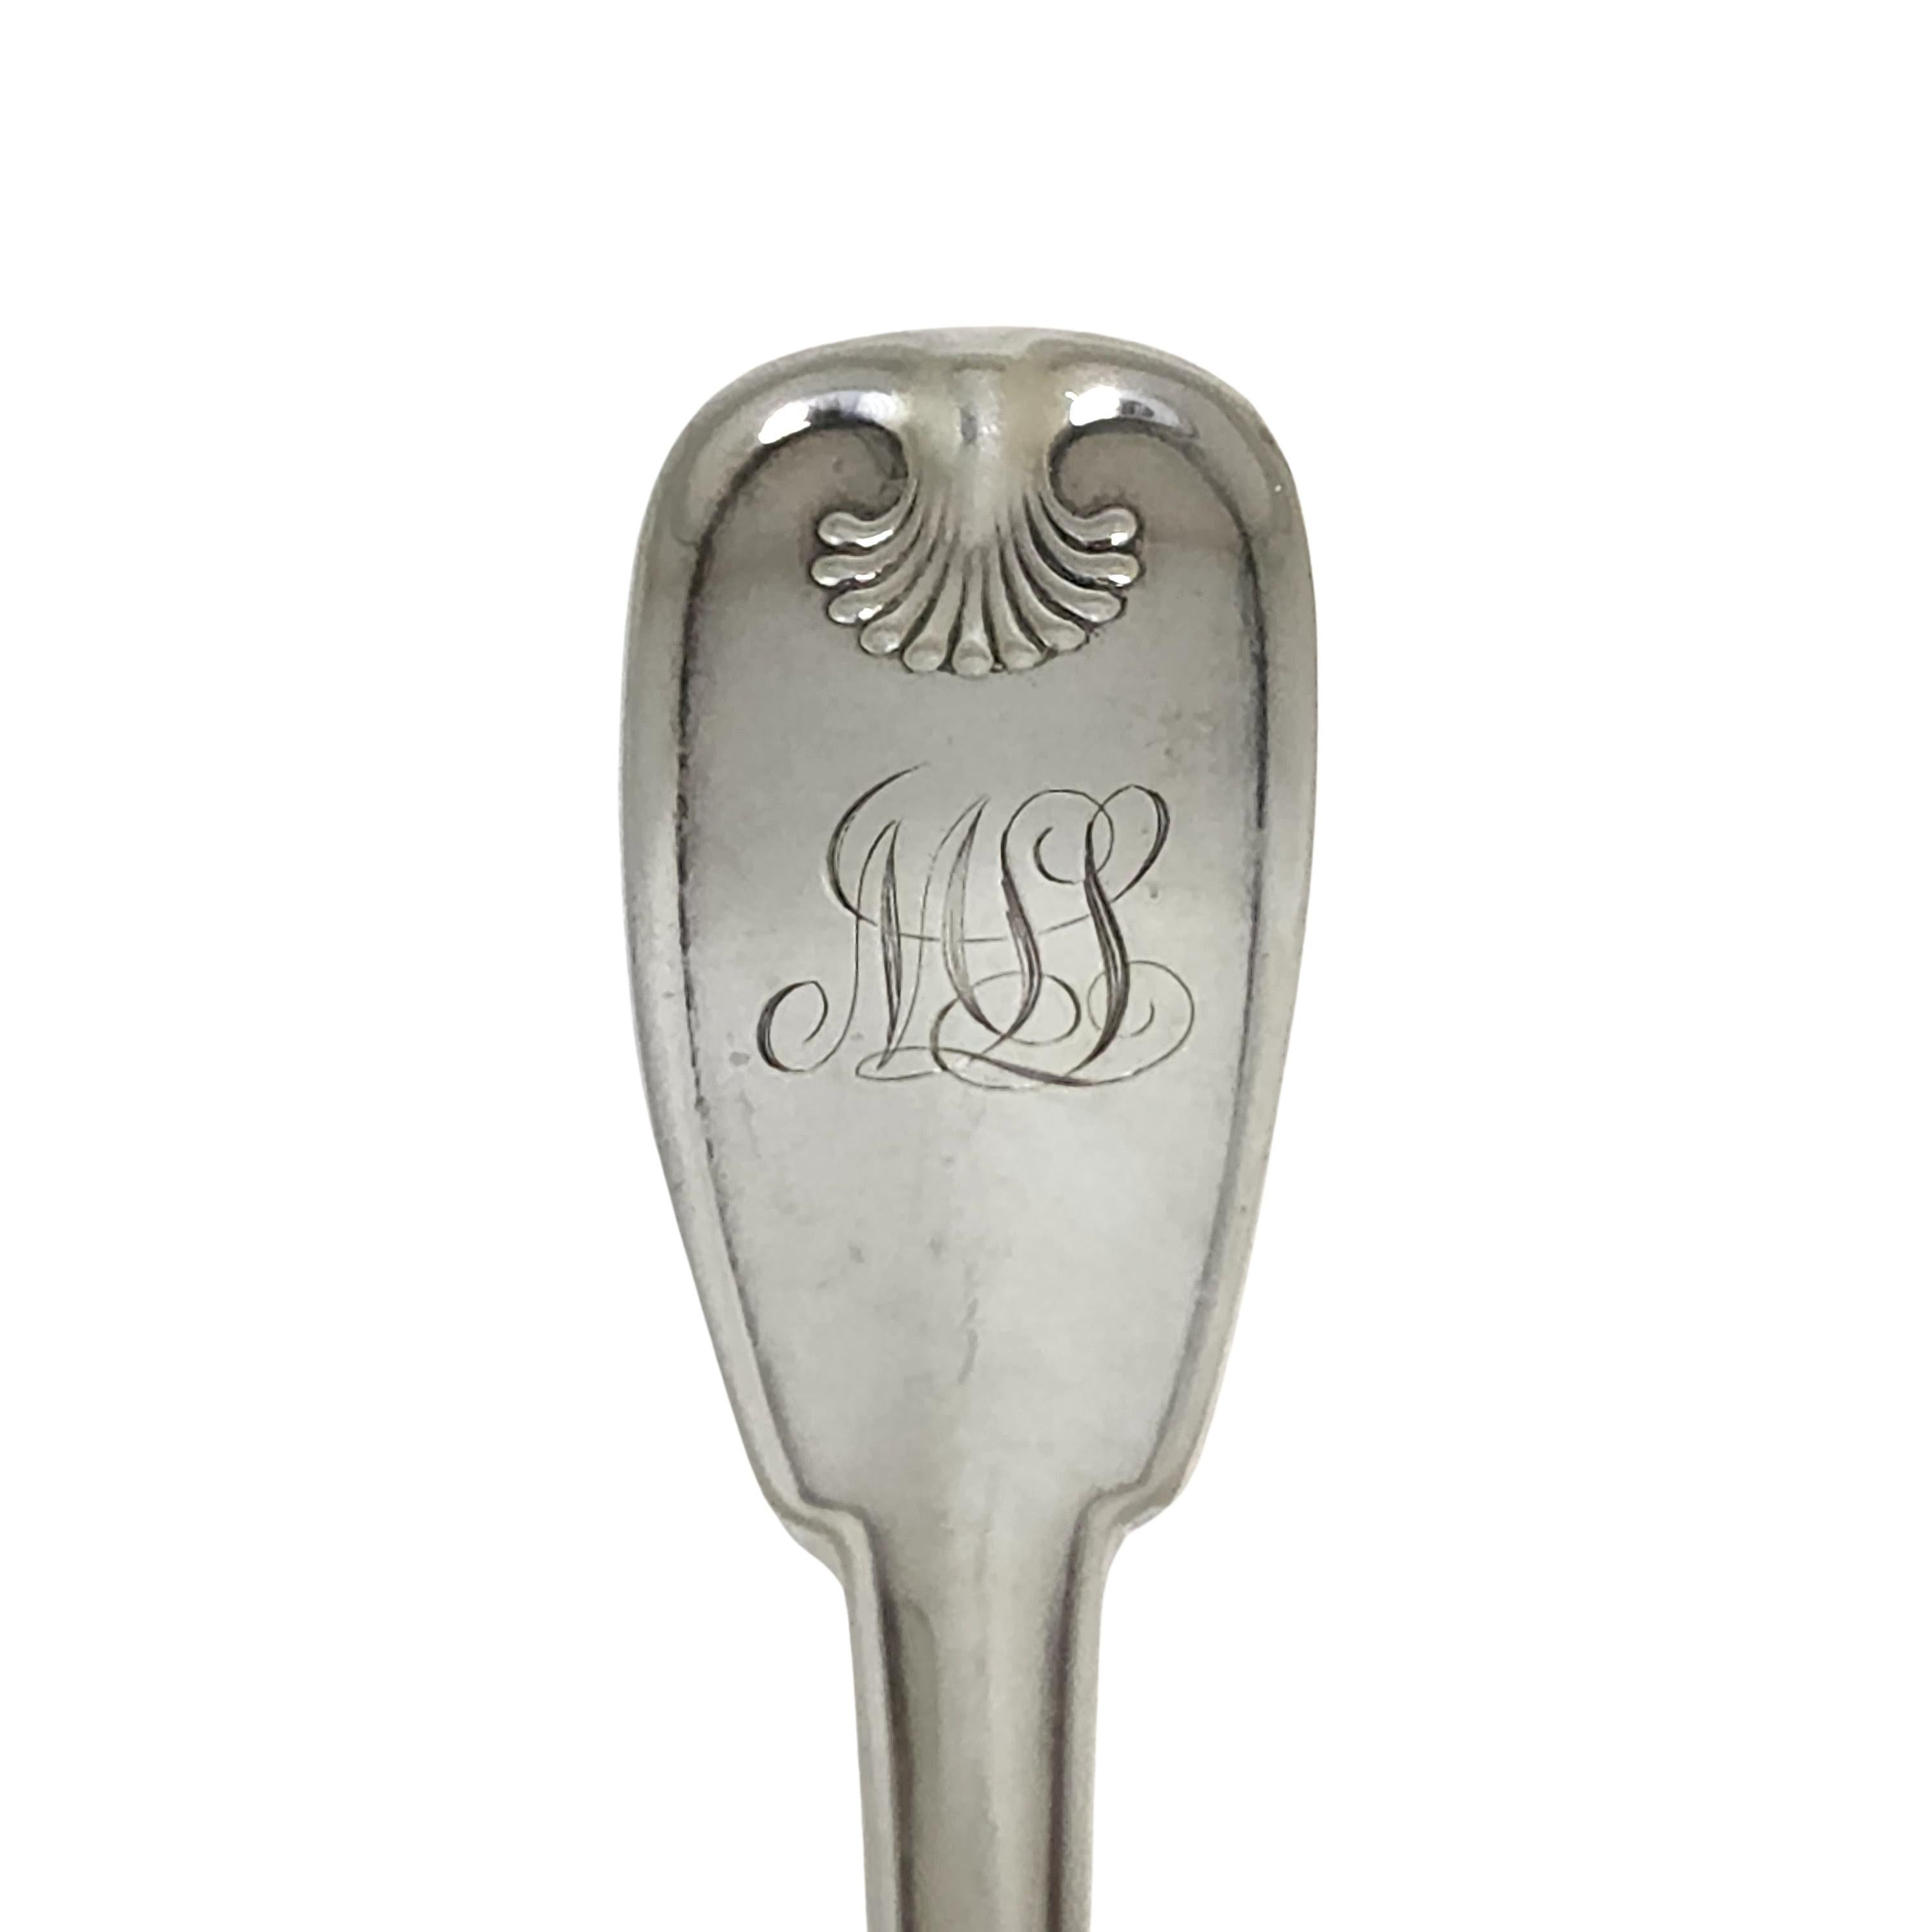 Tiffany & Co Palm Sterling Silver Tablespoon/Serving Spoon with Monogram #12568 For Sale 3